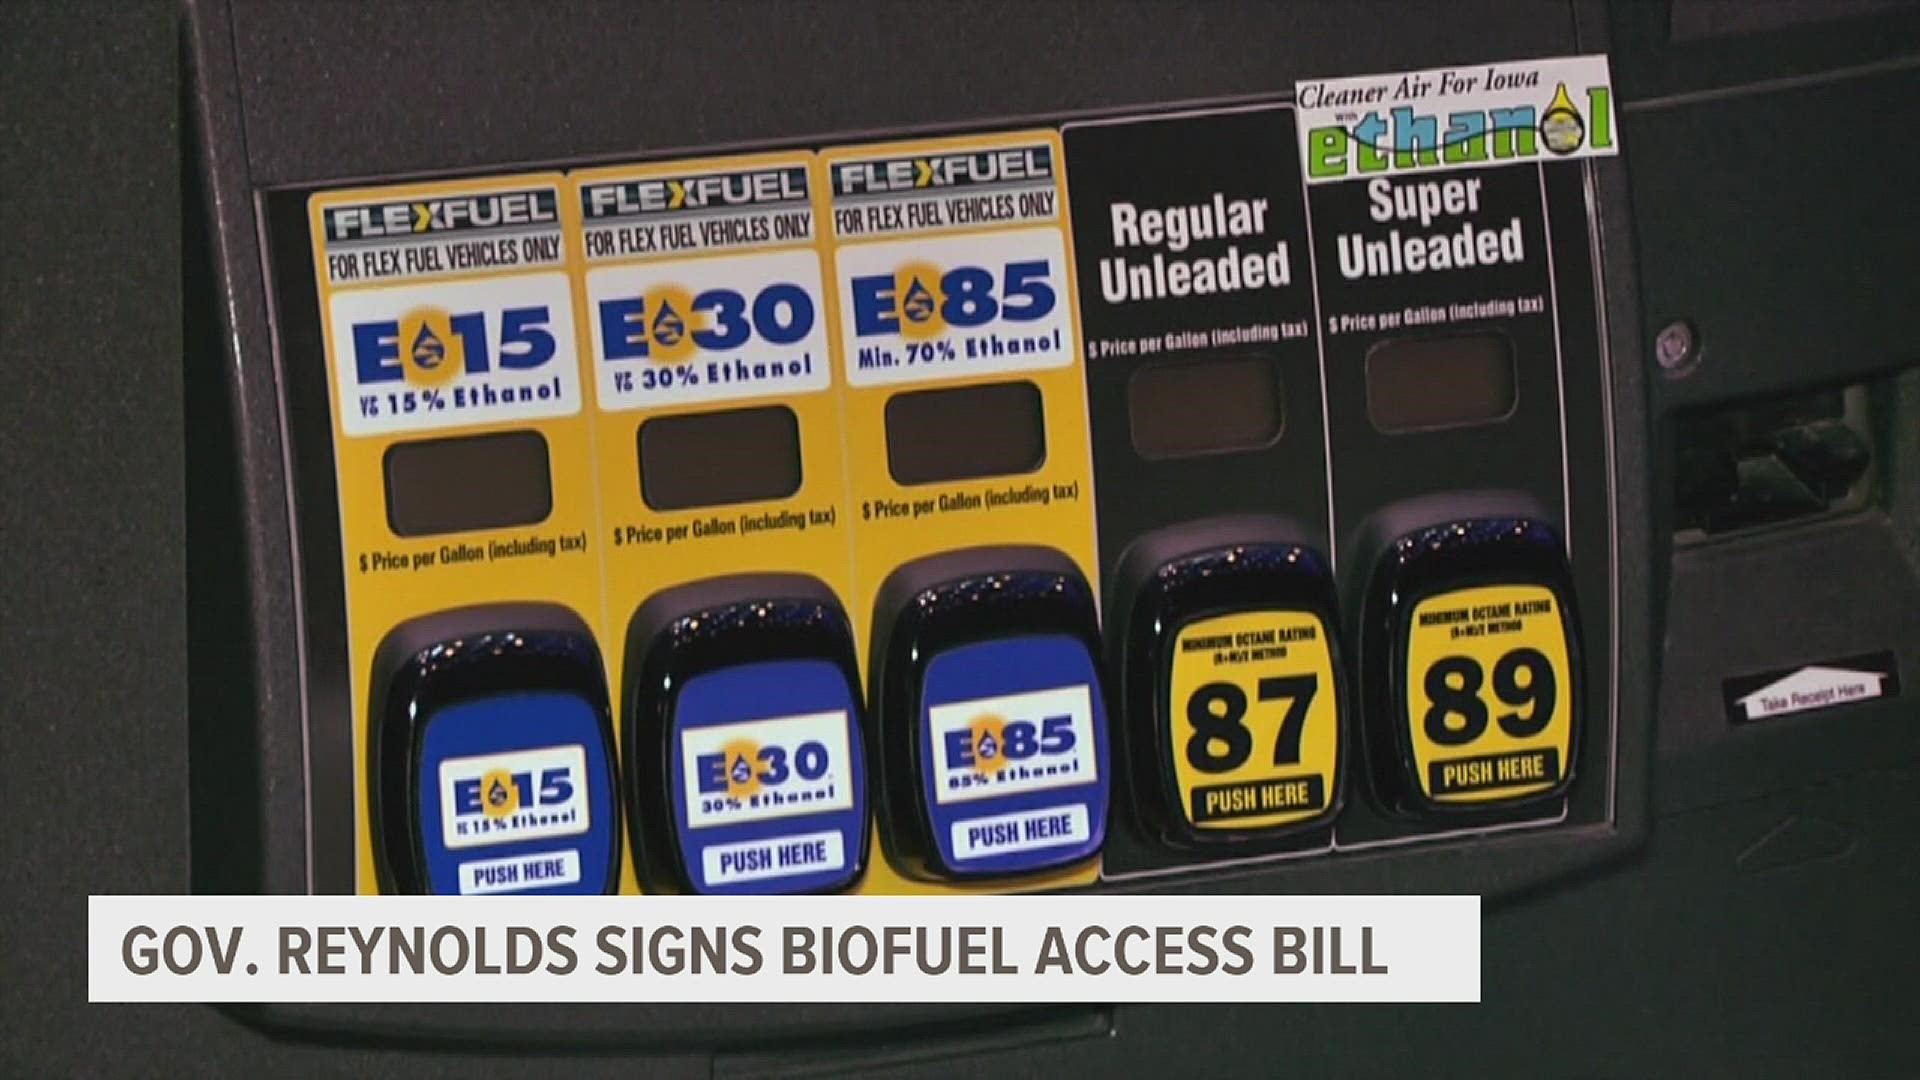 The bill adopts a statewide E15 ethanol standard and seeks to expand access to biofuel across the state to lower the cost of fuel.